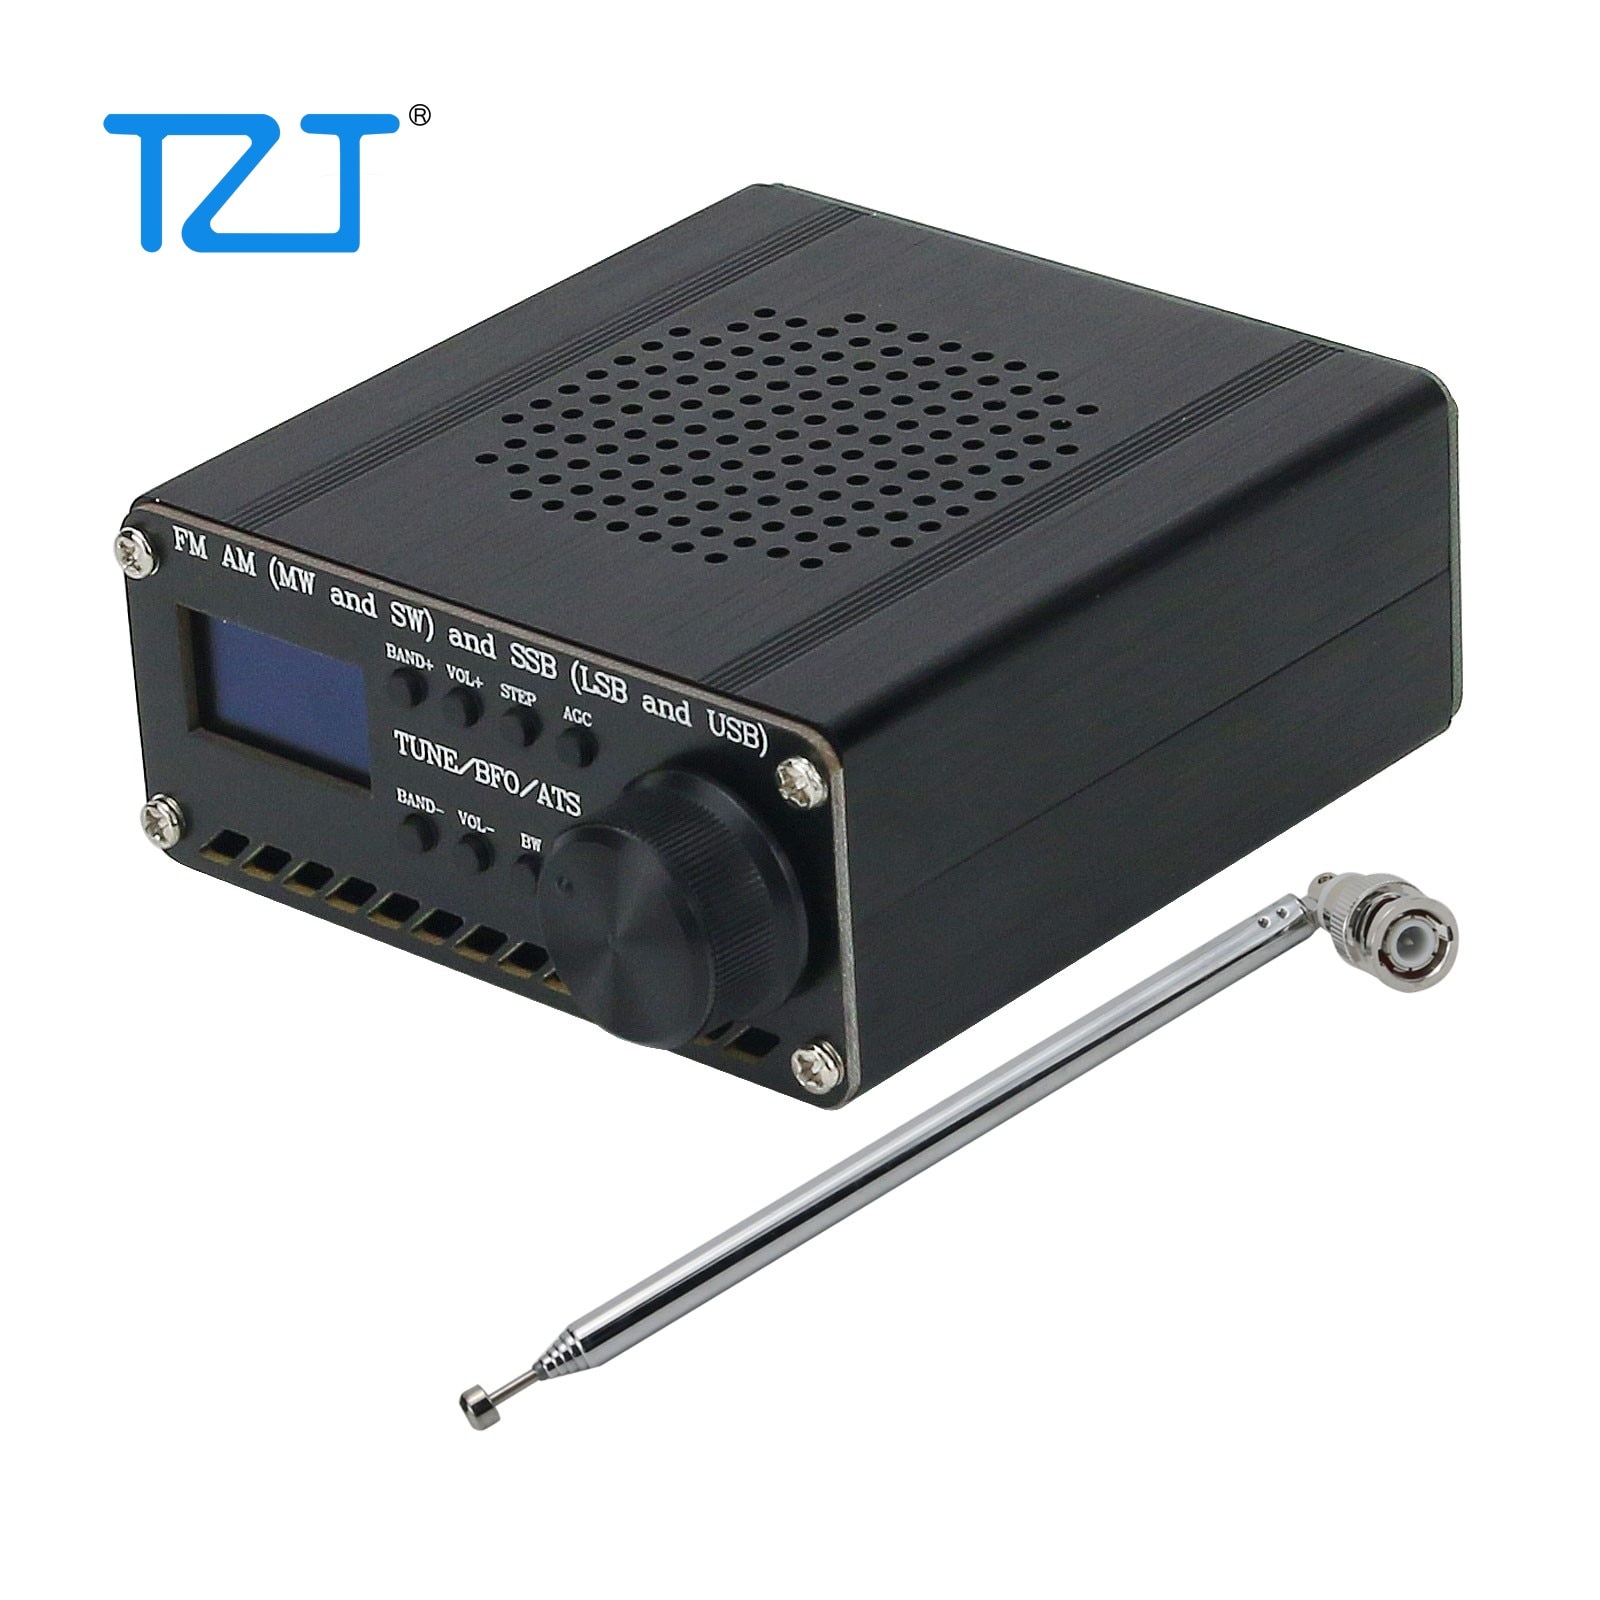 Assembled SI4732 All Band Radio Receiver FM AM (MW & SW) SSB (LSB & USB) with lithium battery + Antenna + Speaker + Case